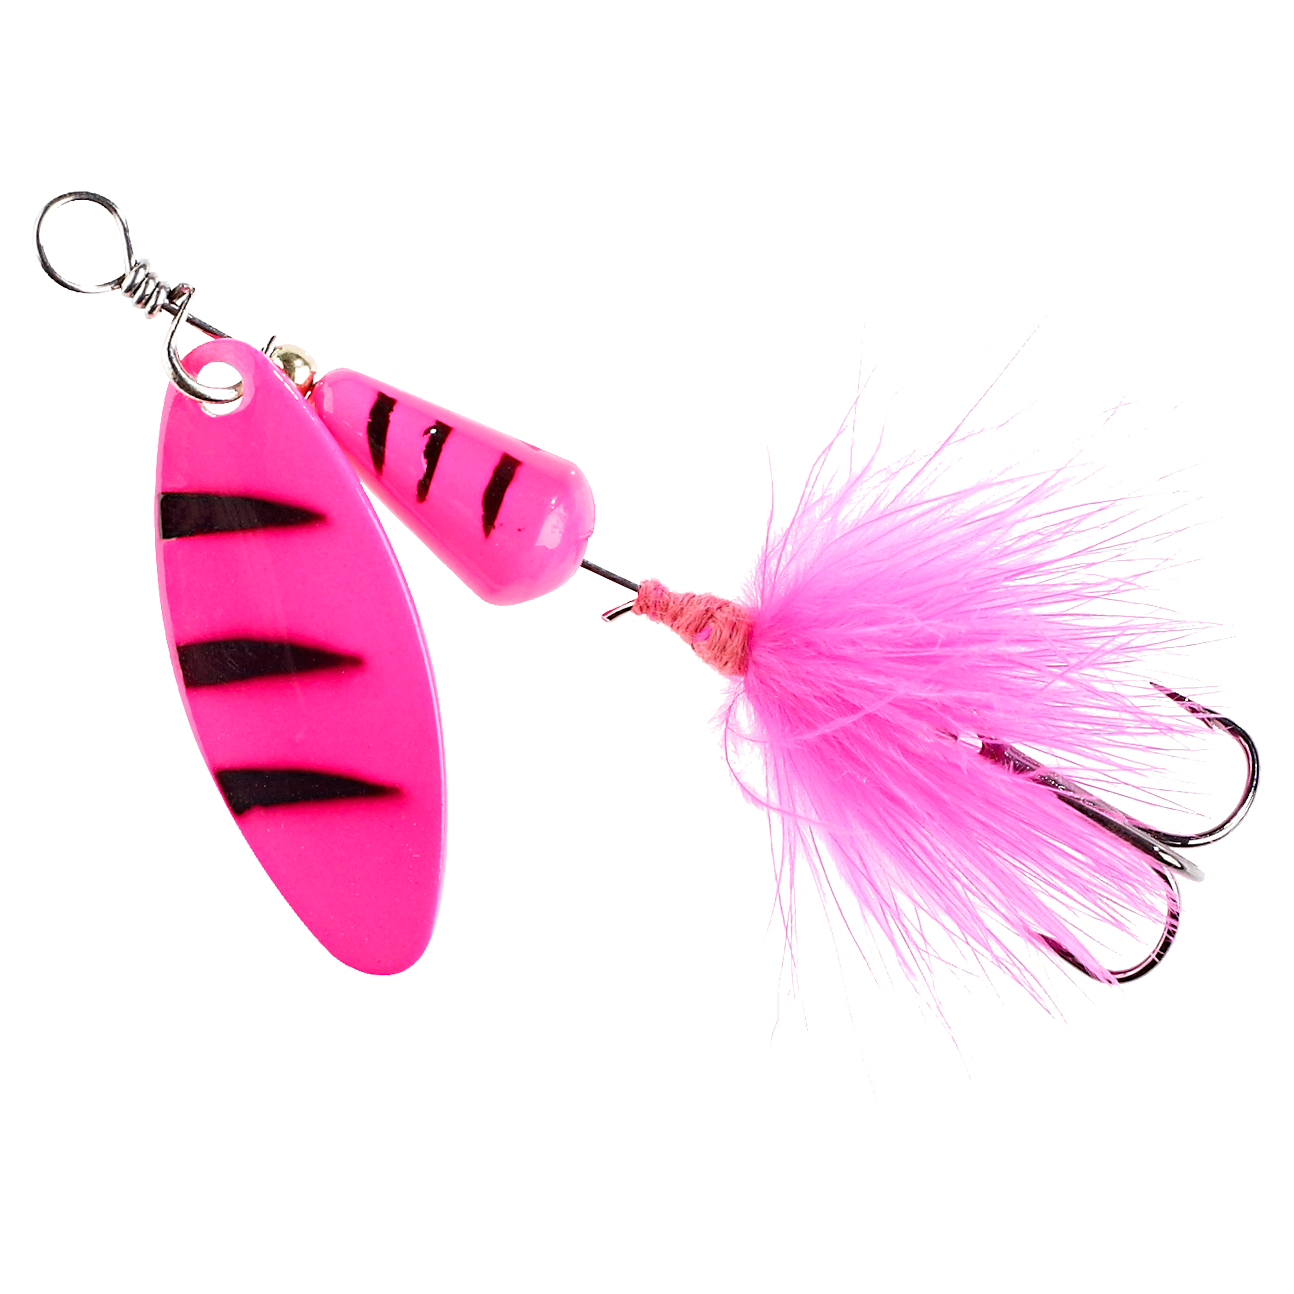 Colonel Spinner Fuzzy (Pink Lady) at low prices